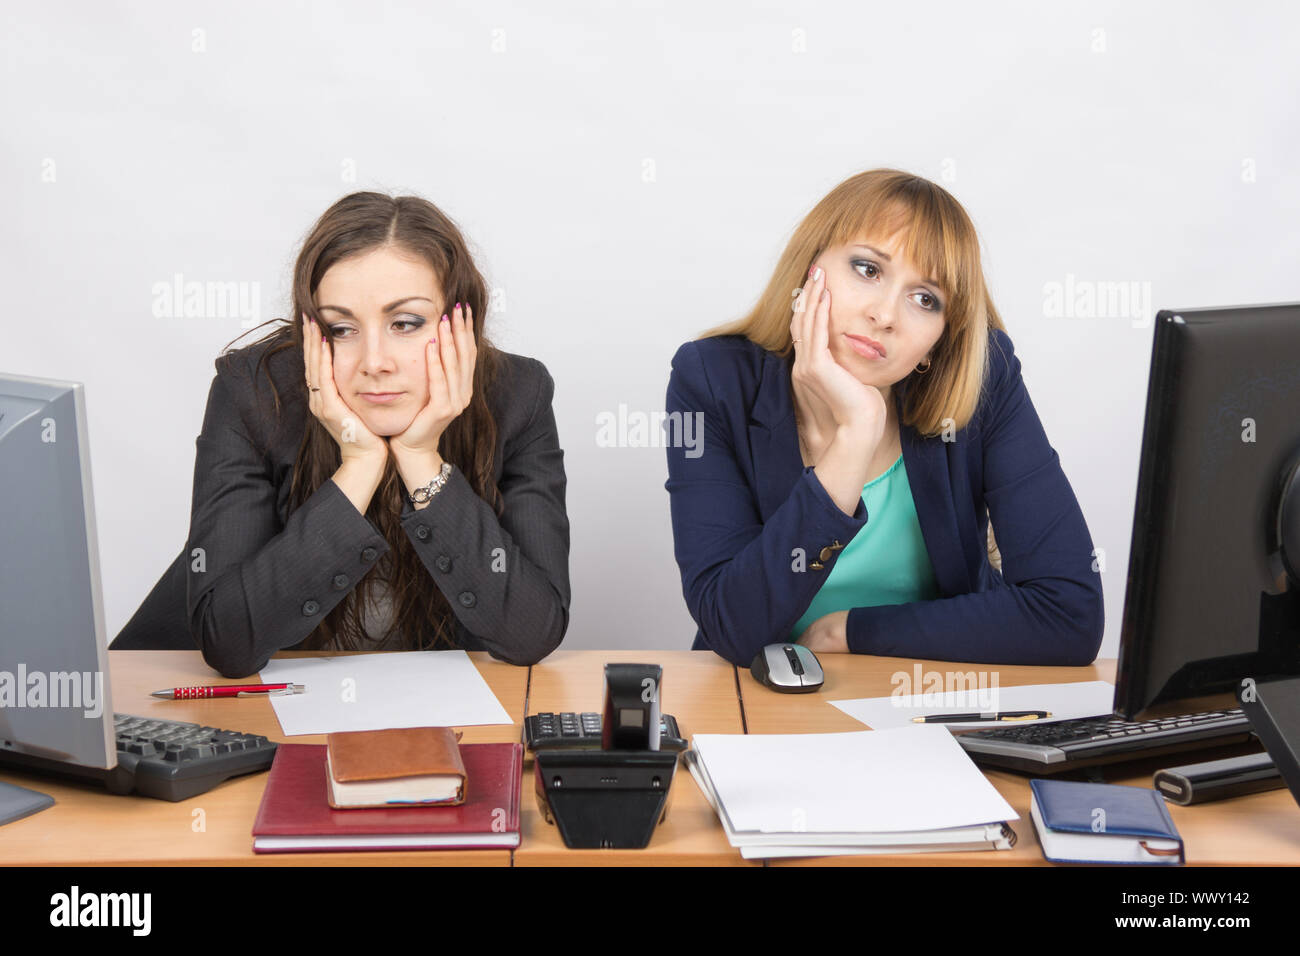 Two young office worker tired of sitting in front of computers Stock Photo